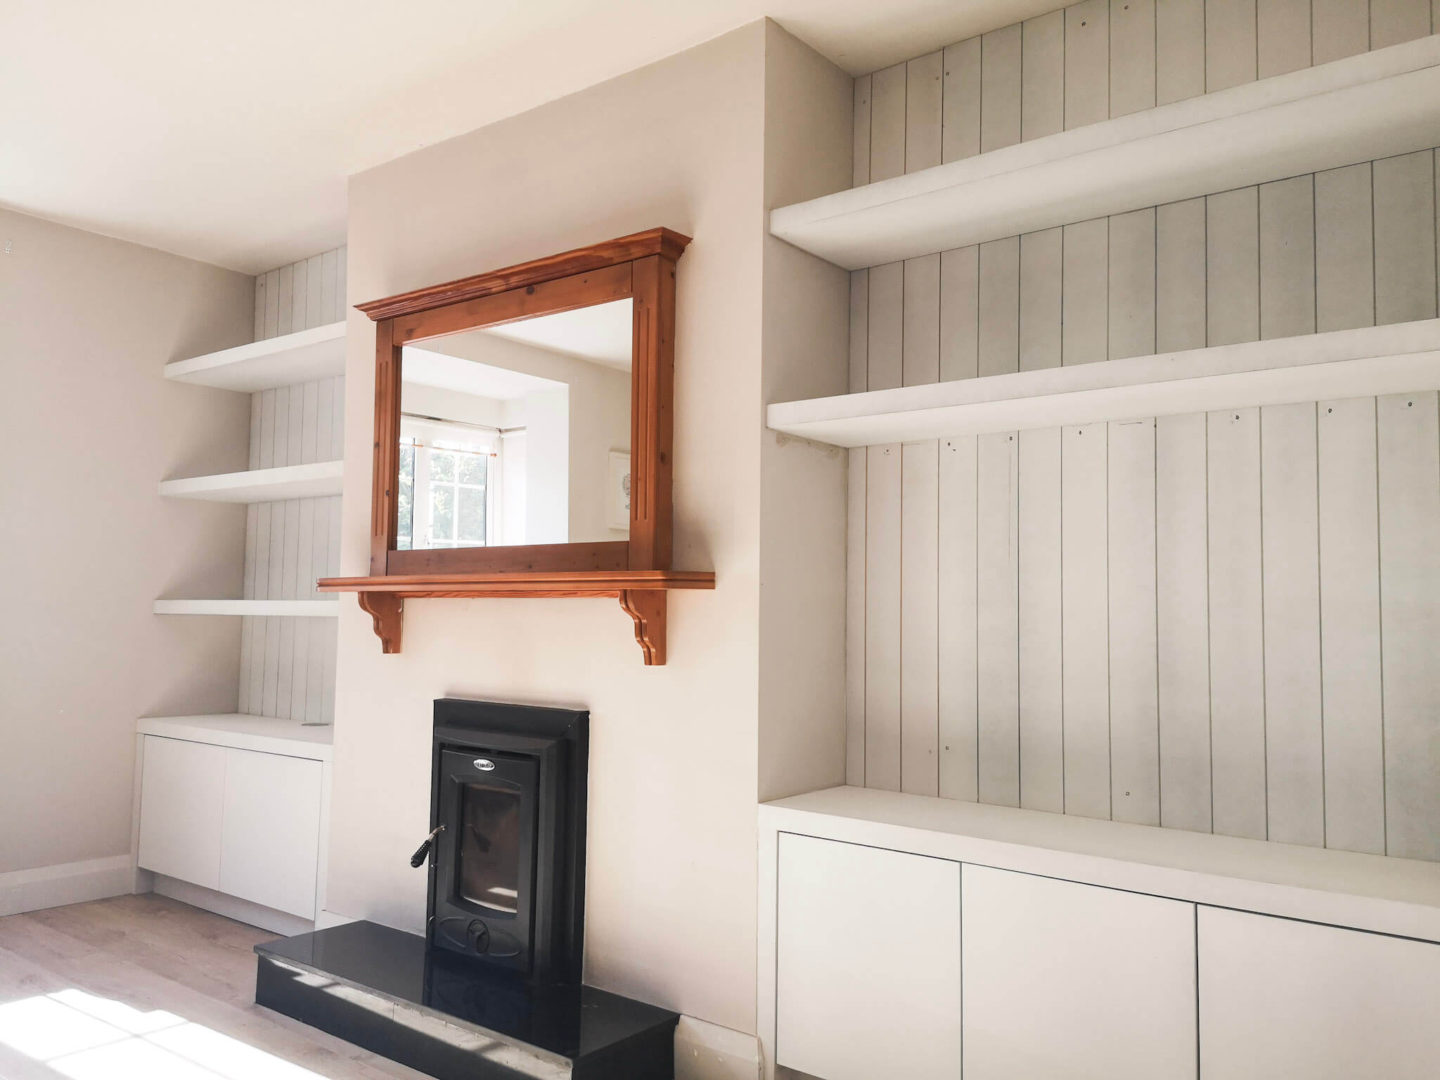 A living room built in with primed shiplap on either side of the fireplace, with chunky shelves and storage on the bottom with plain flat doors.